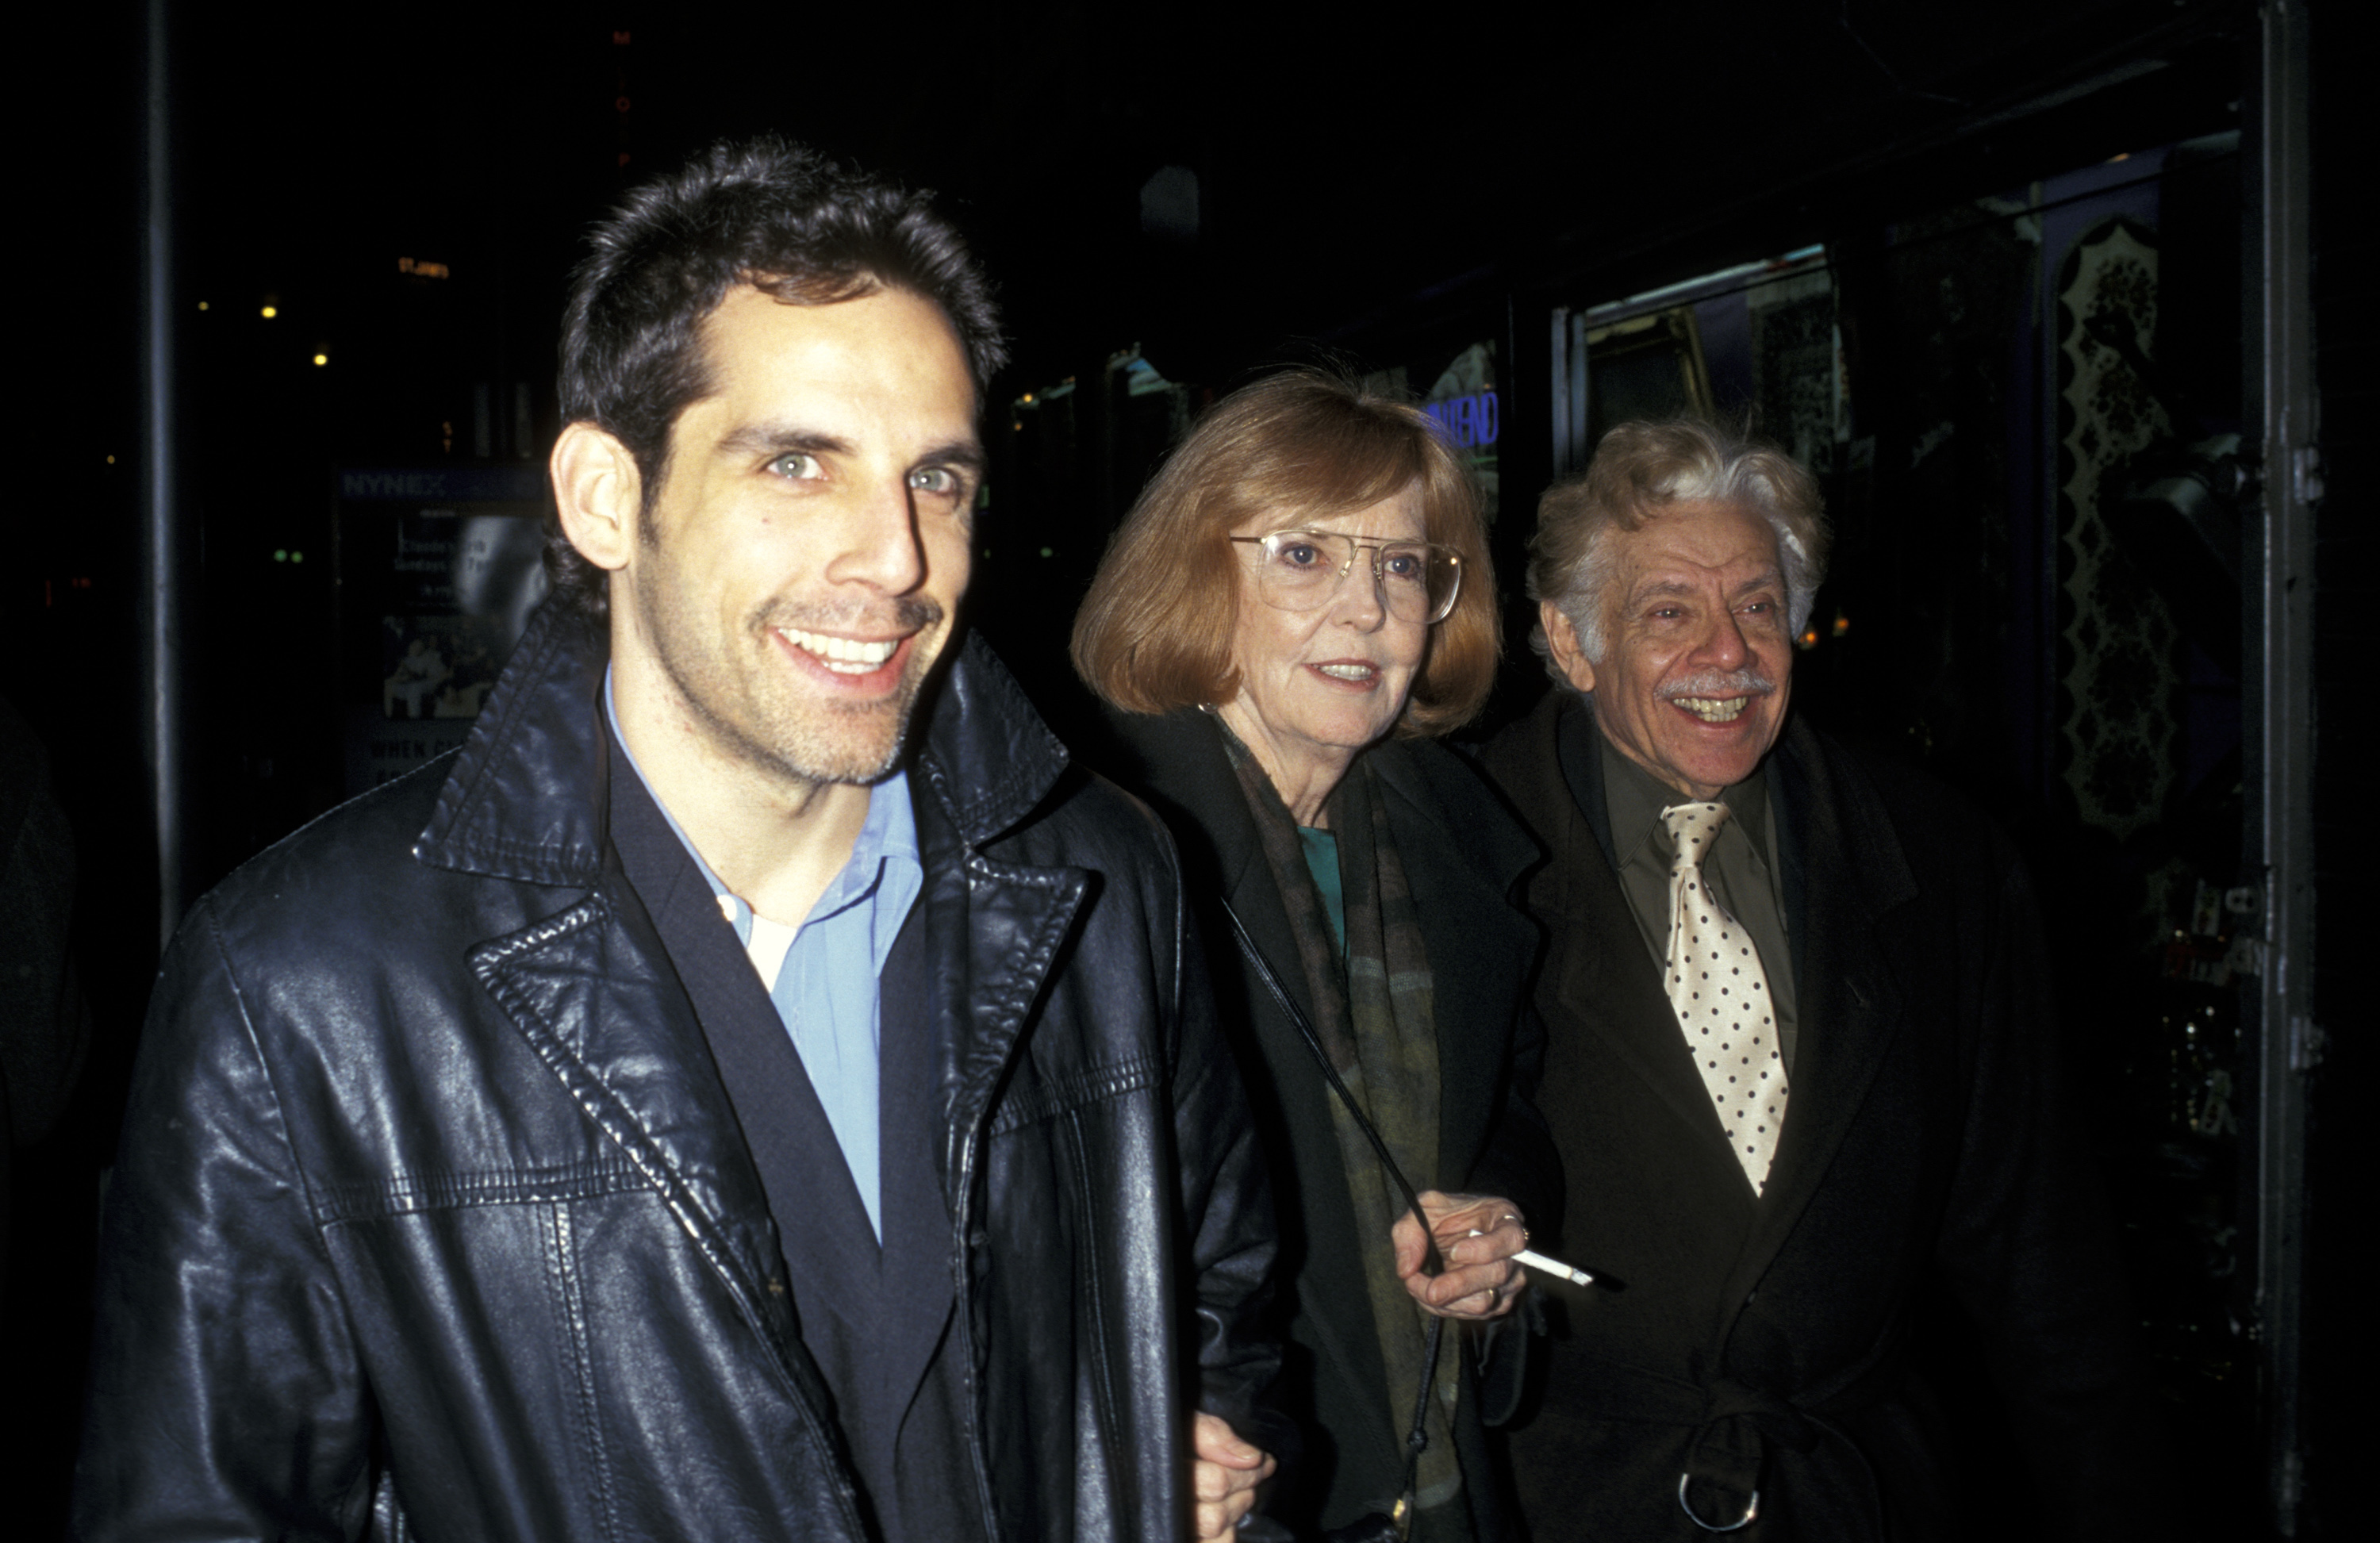 Ben Stiller and his parents Ann Meara and Jerry Stiller on February 13, 1997 | Source: Getty Images